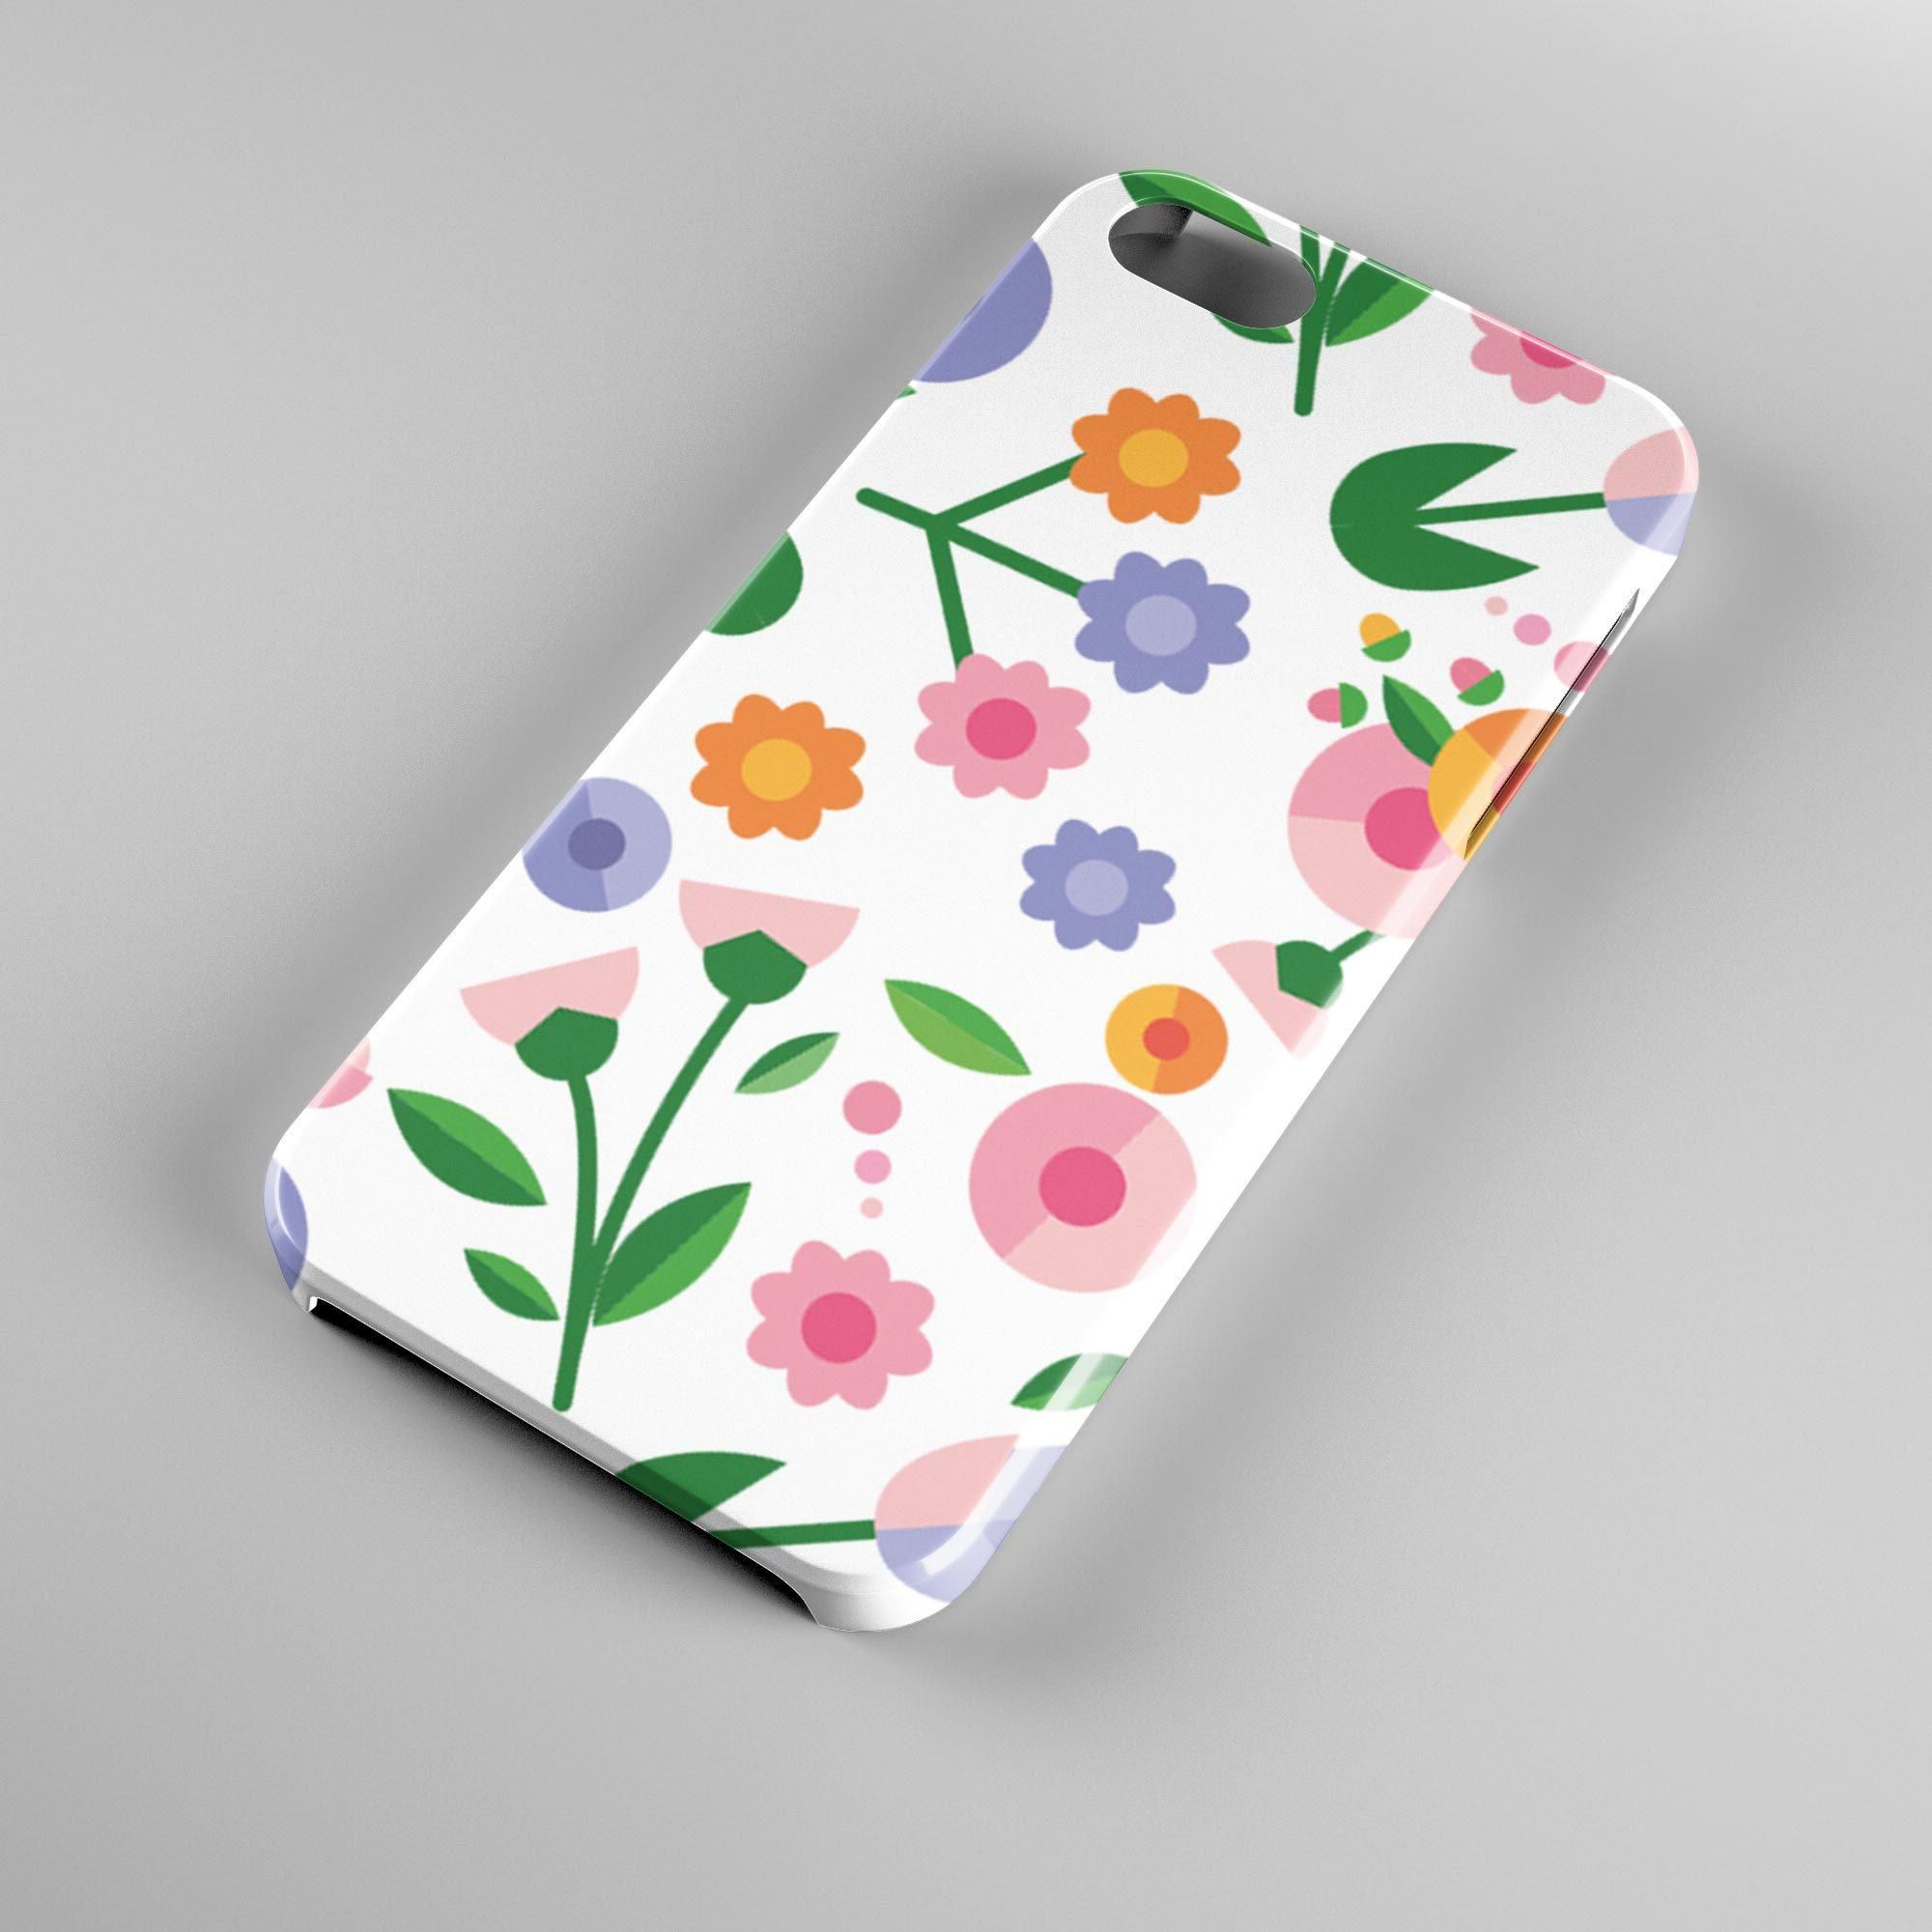 Pastel Pixellated Floral Phone for iPhone 5